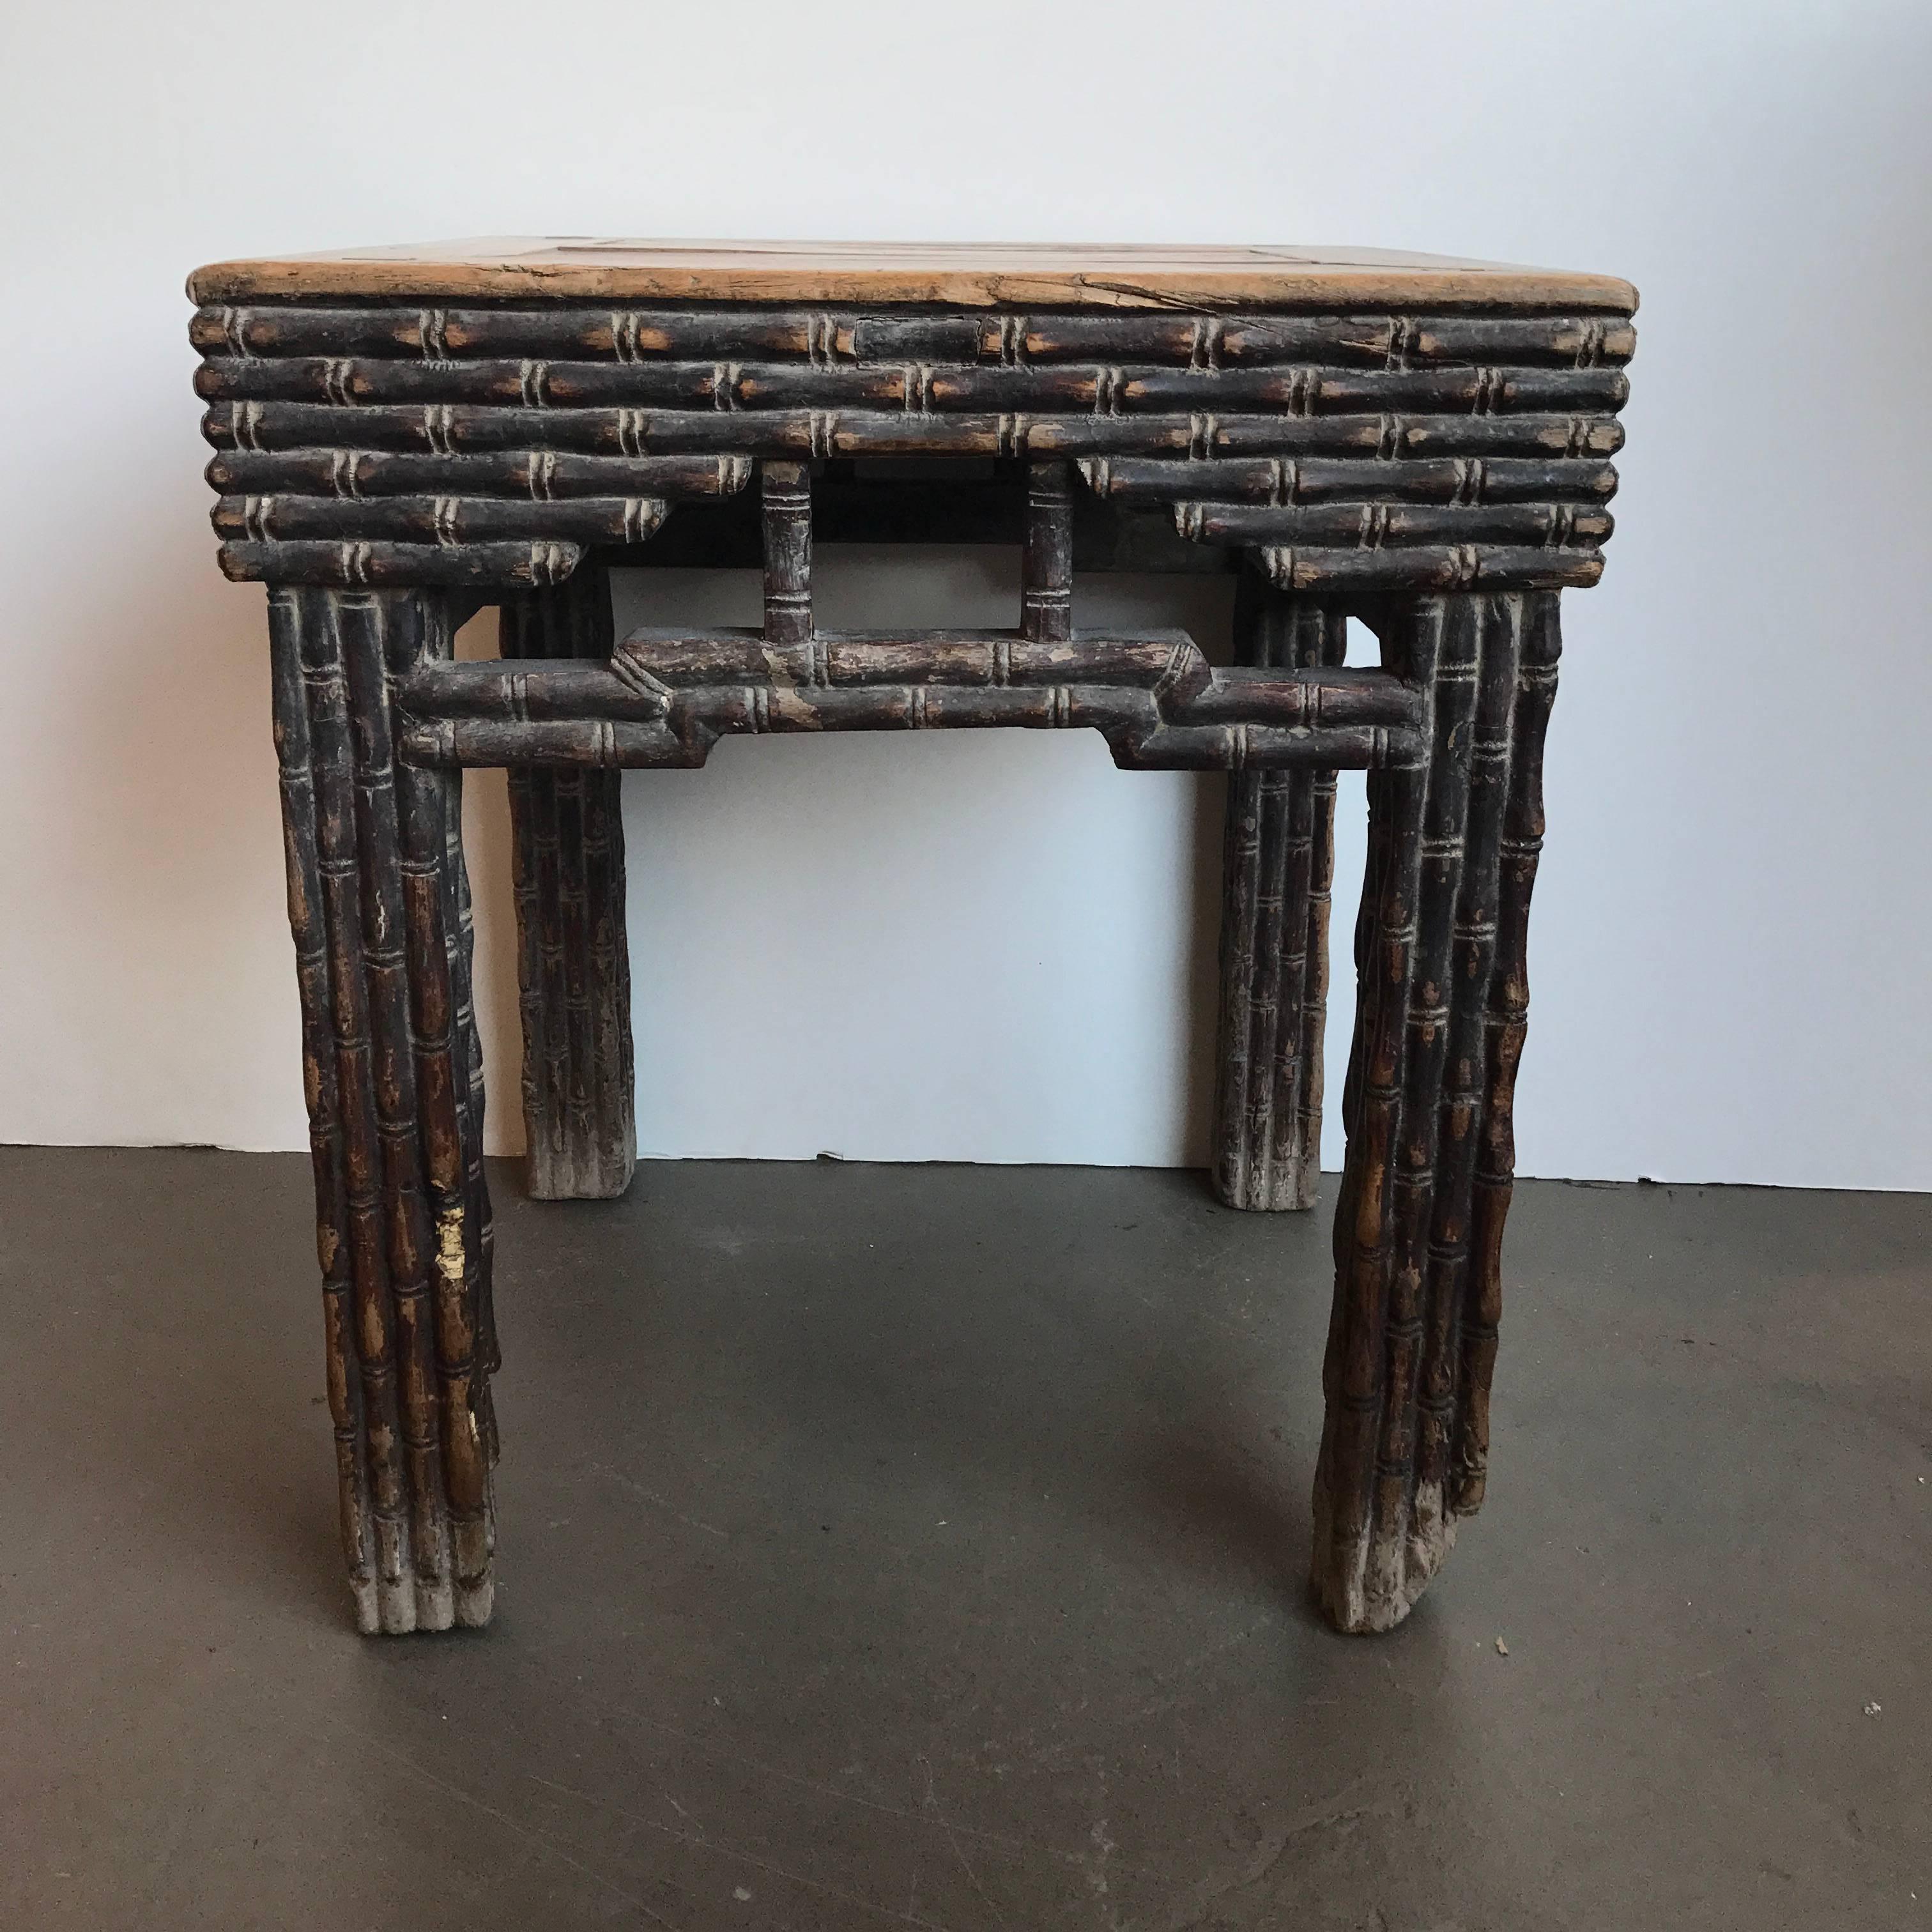 Pair of 18th century Chinese elmwood side tables. Faux bamboo carving. Dug up from underground in the Shanxi Province.